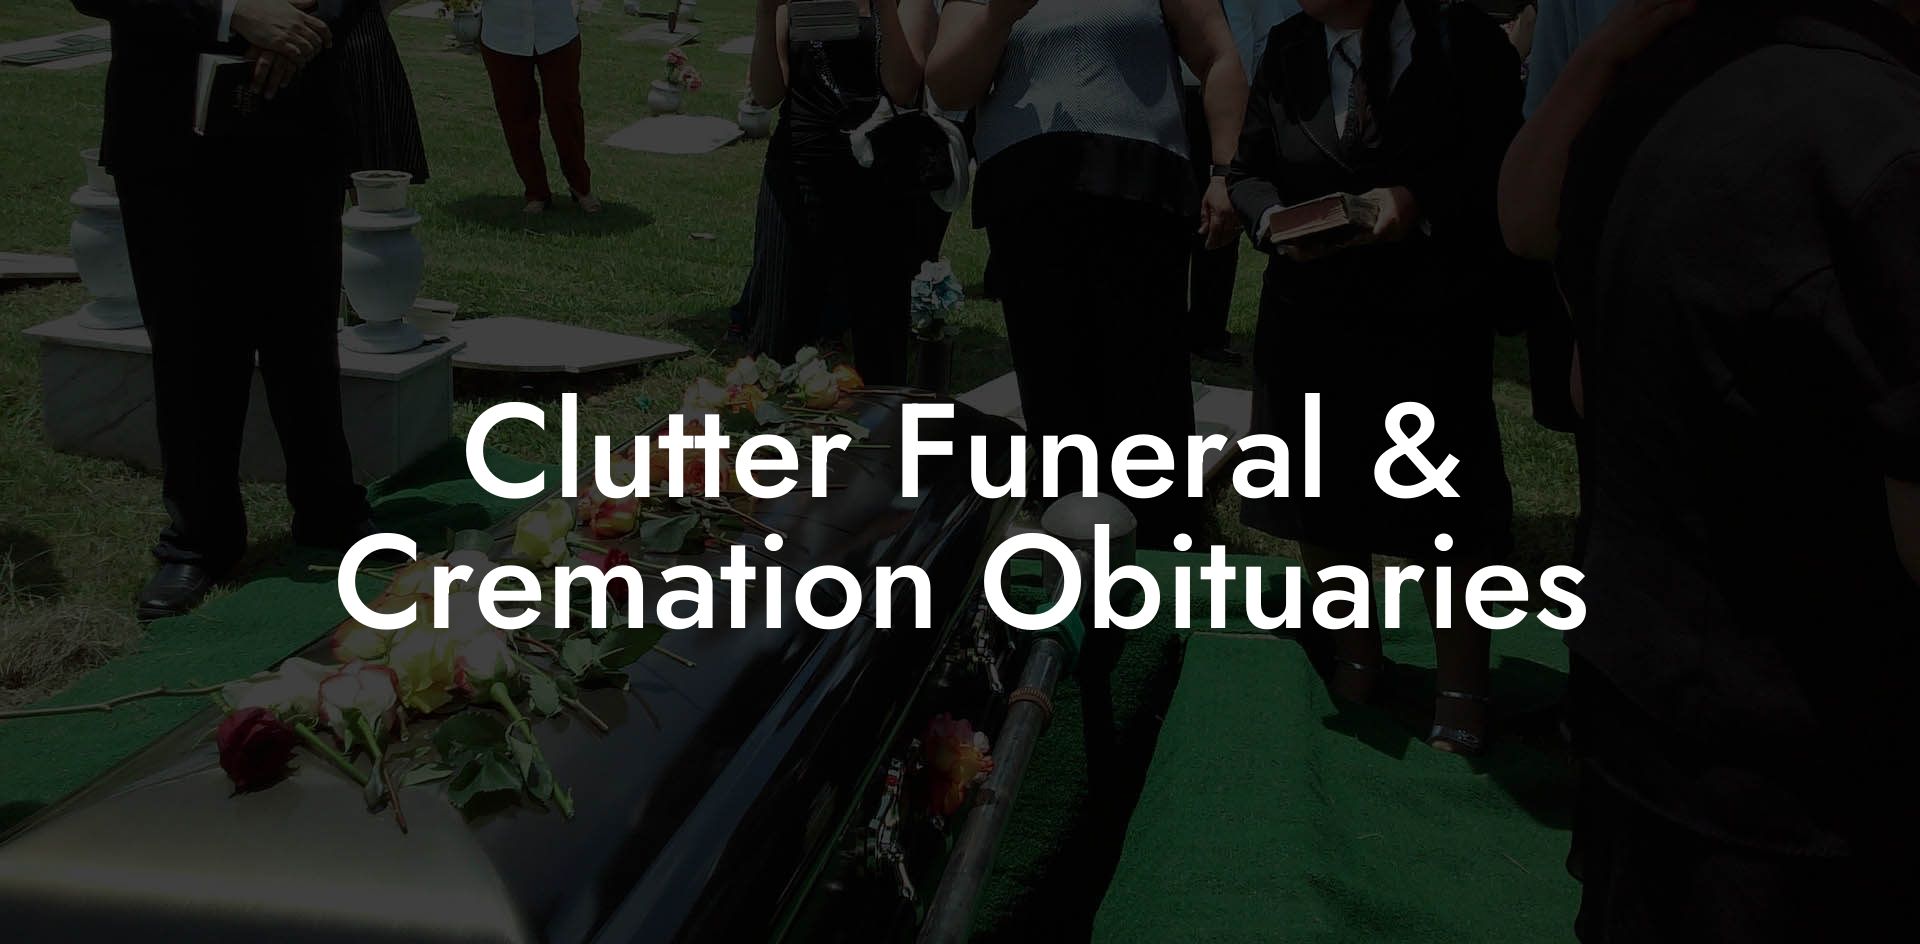 Clutter Funeral & Cremation Obituaries